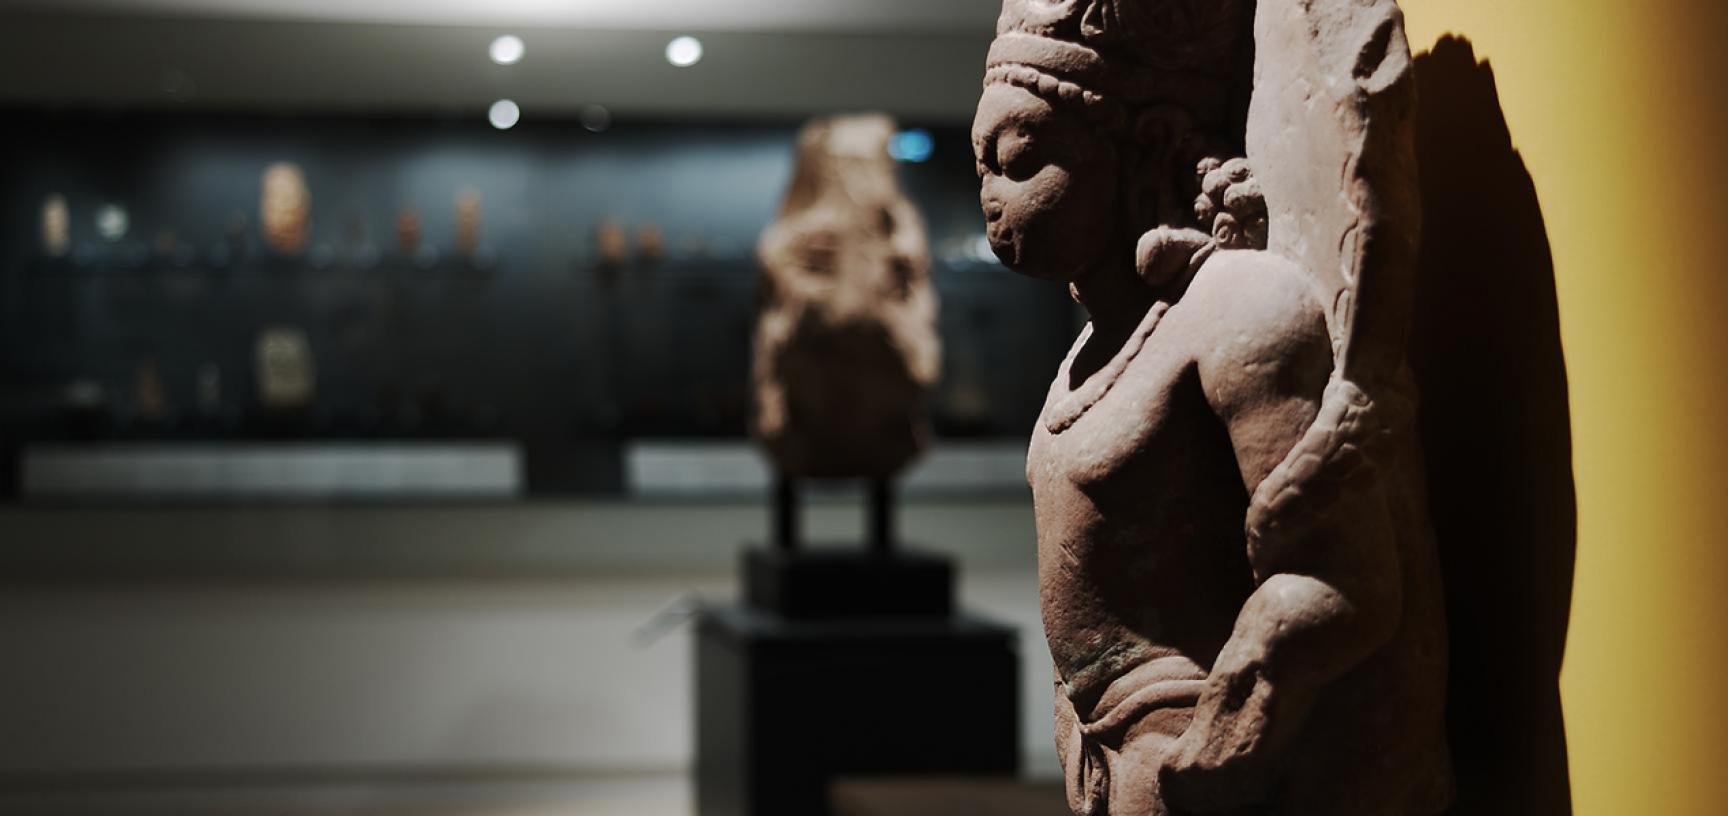 The India Gallery at the Ashmolean Museum